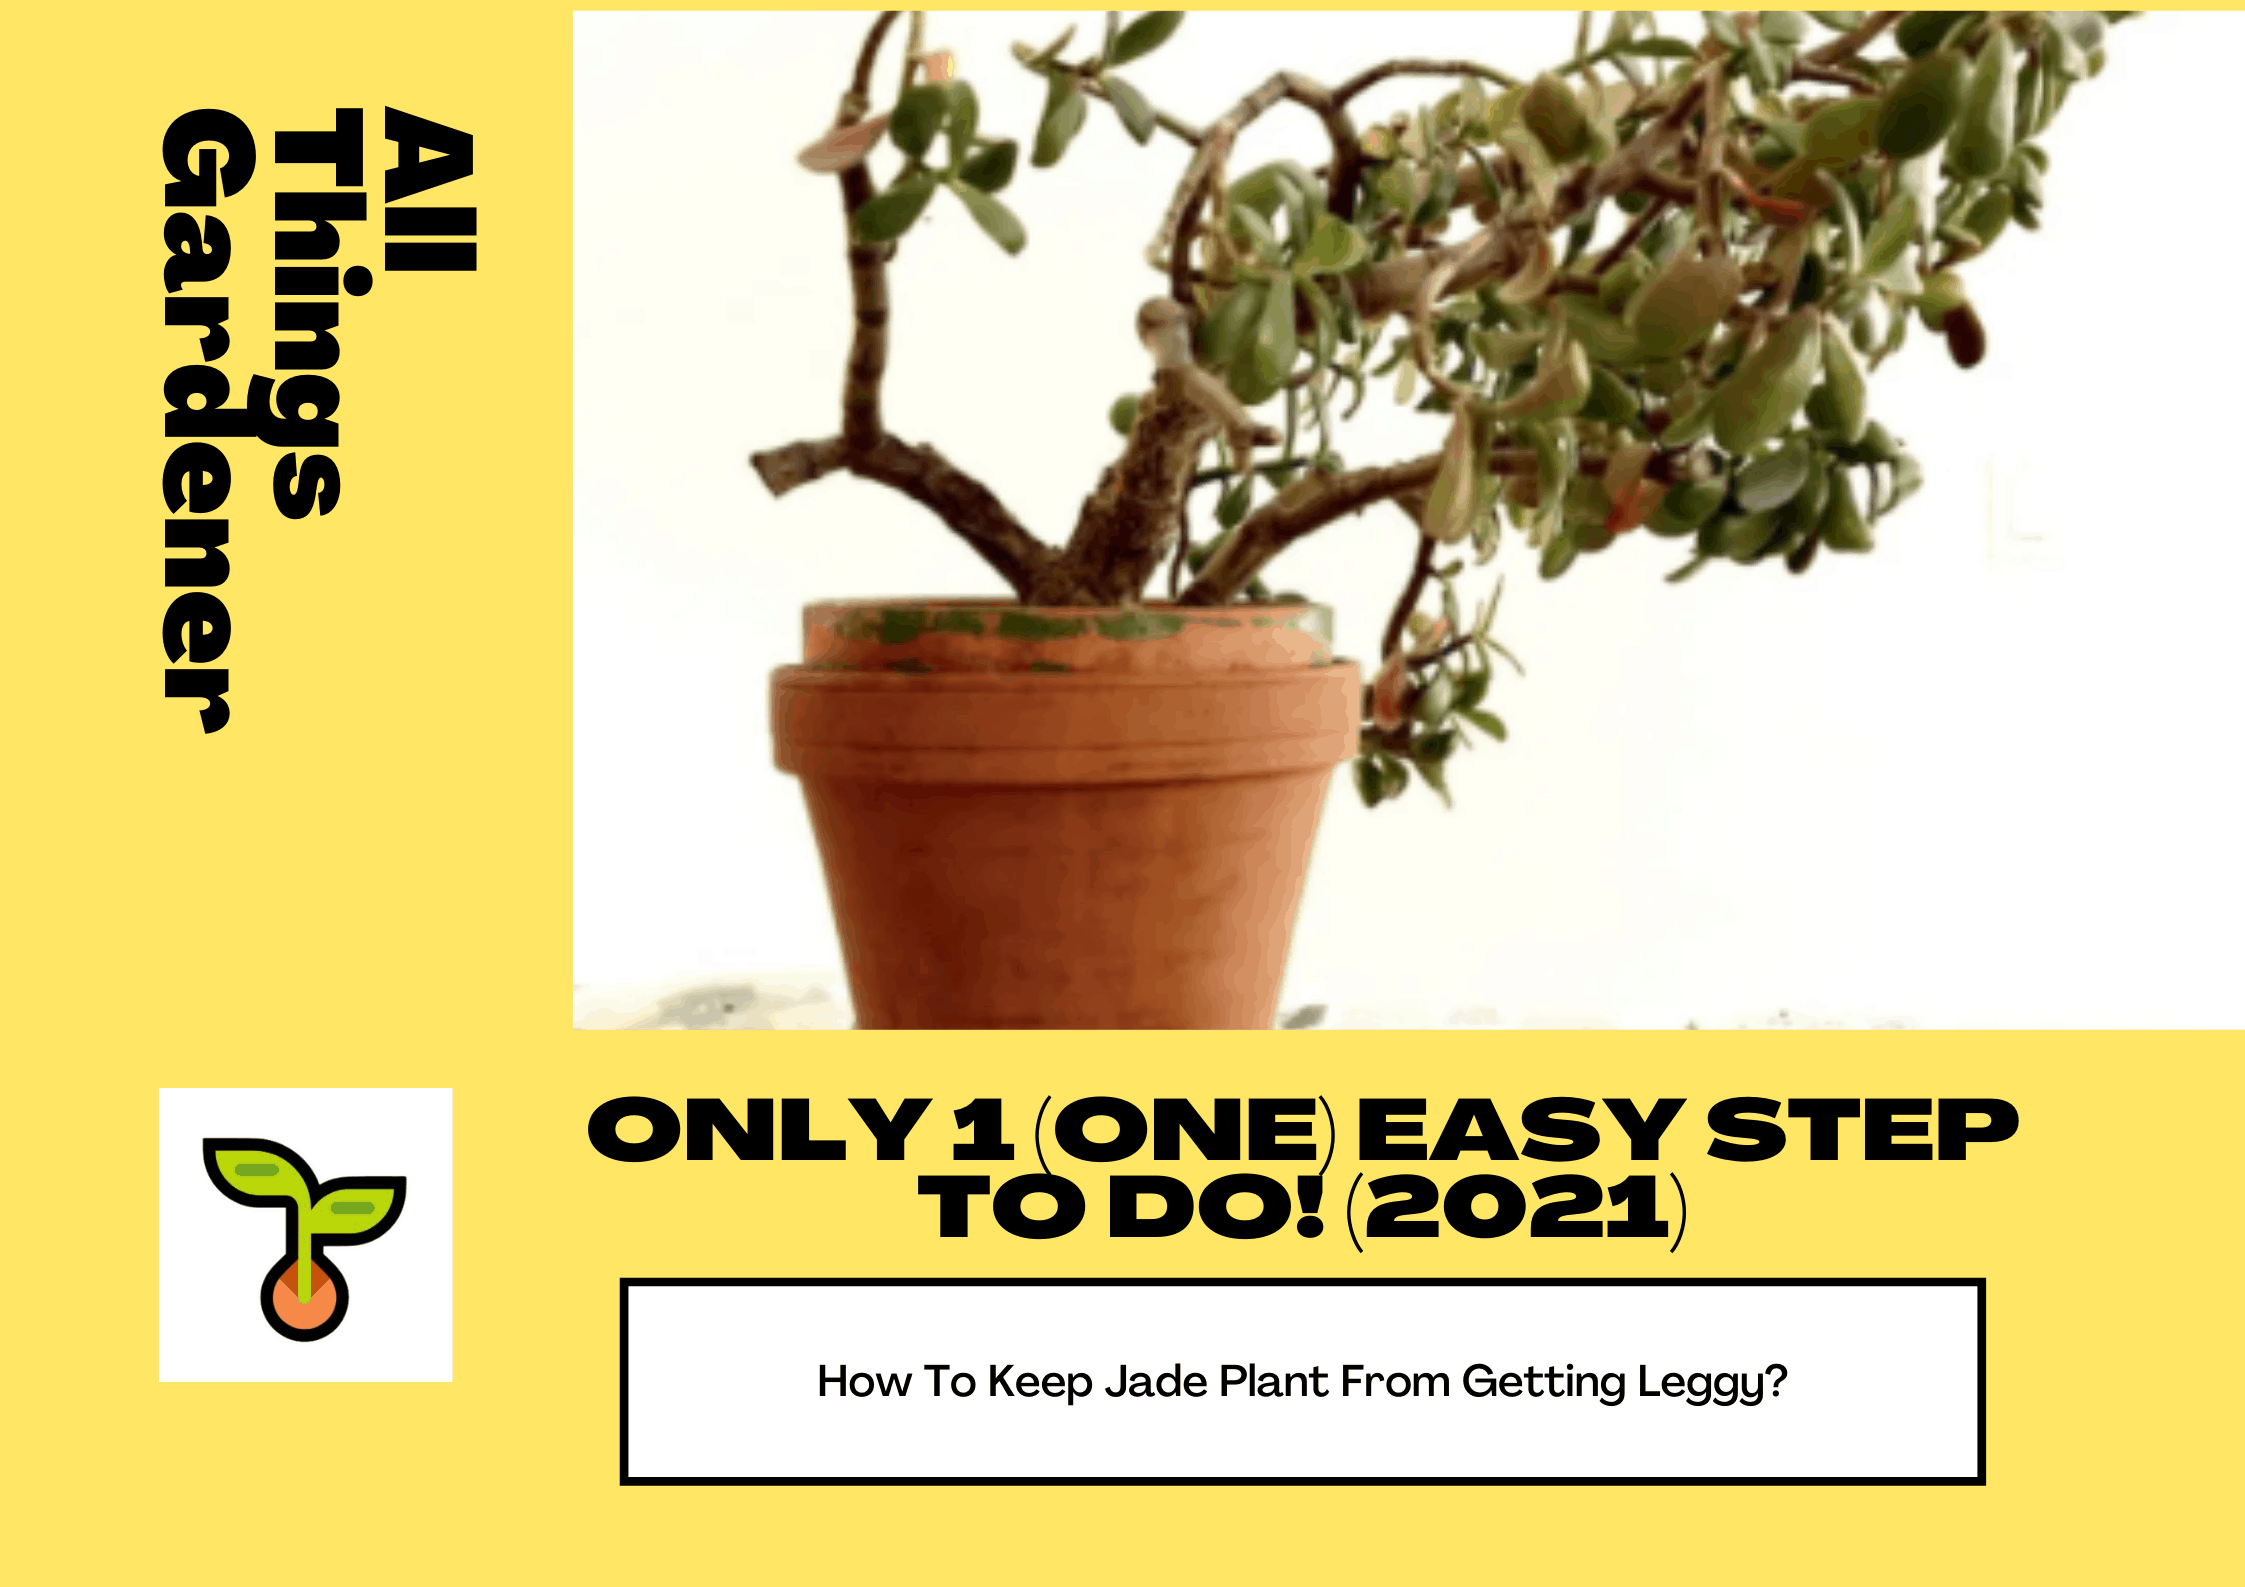 How to keep jade plant from getting leggy? 1